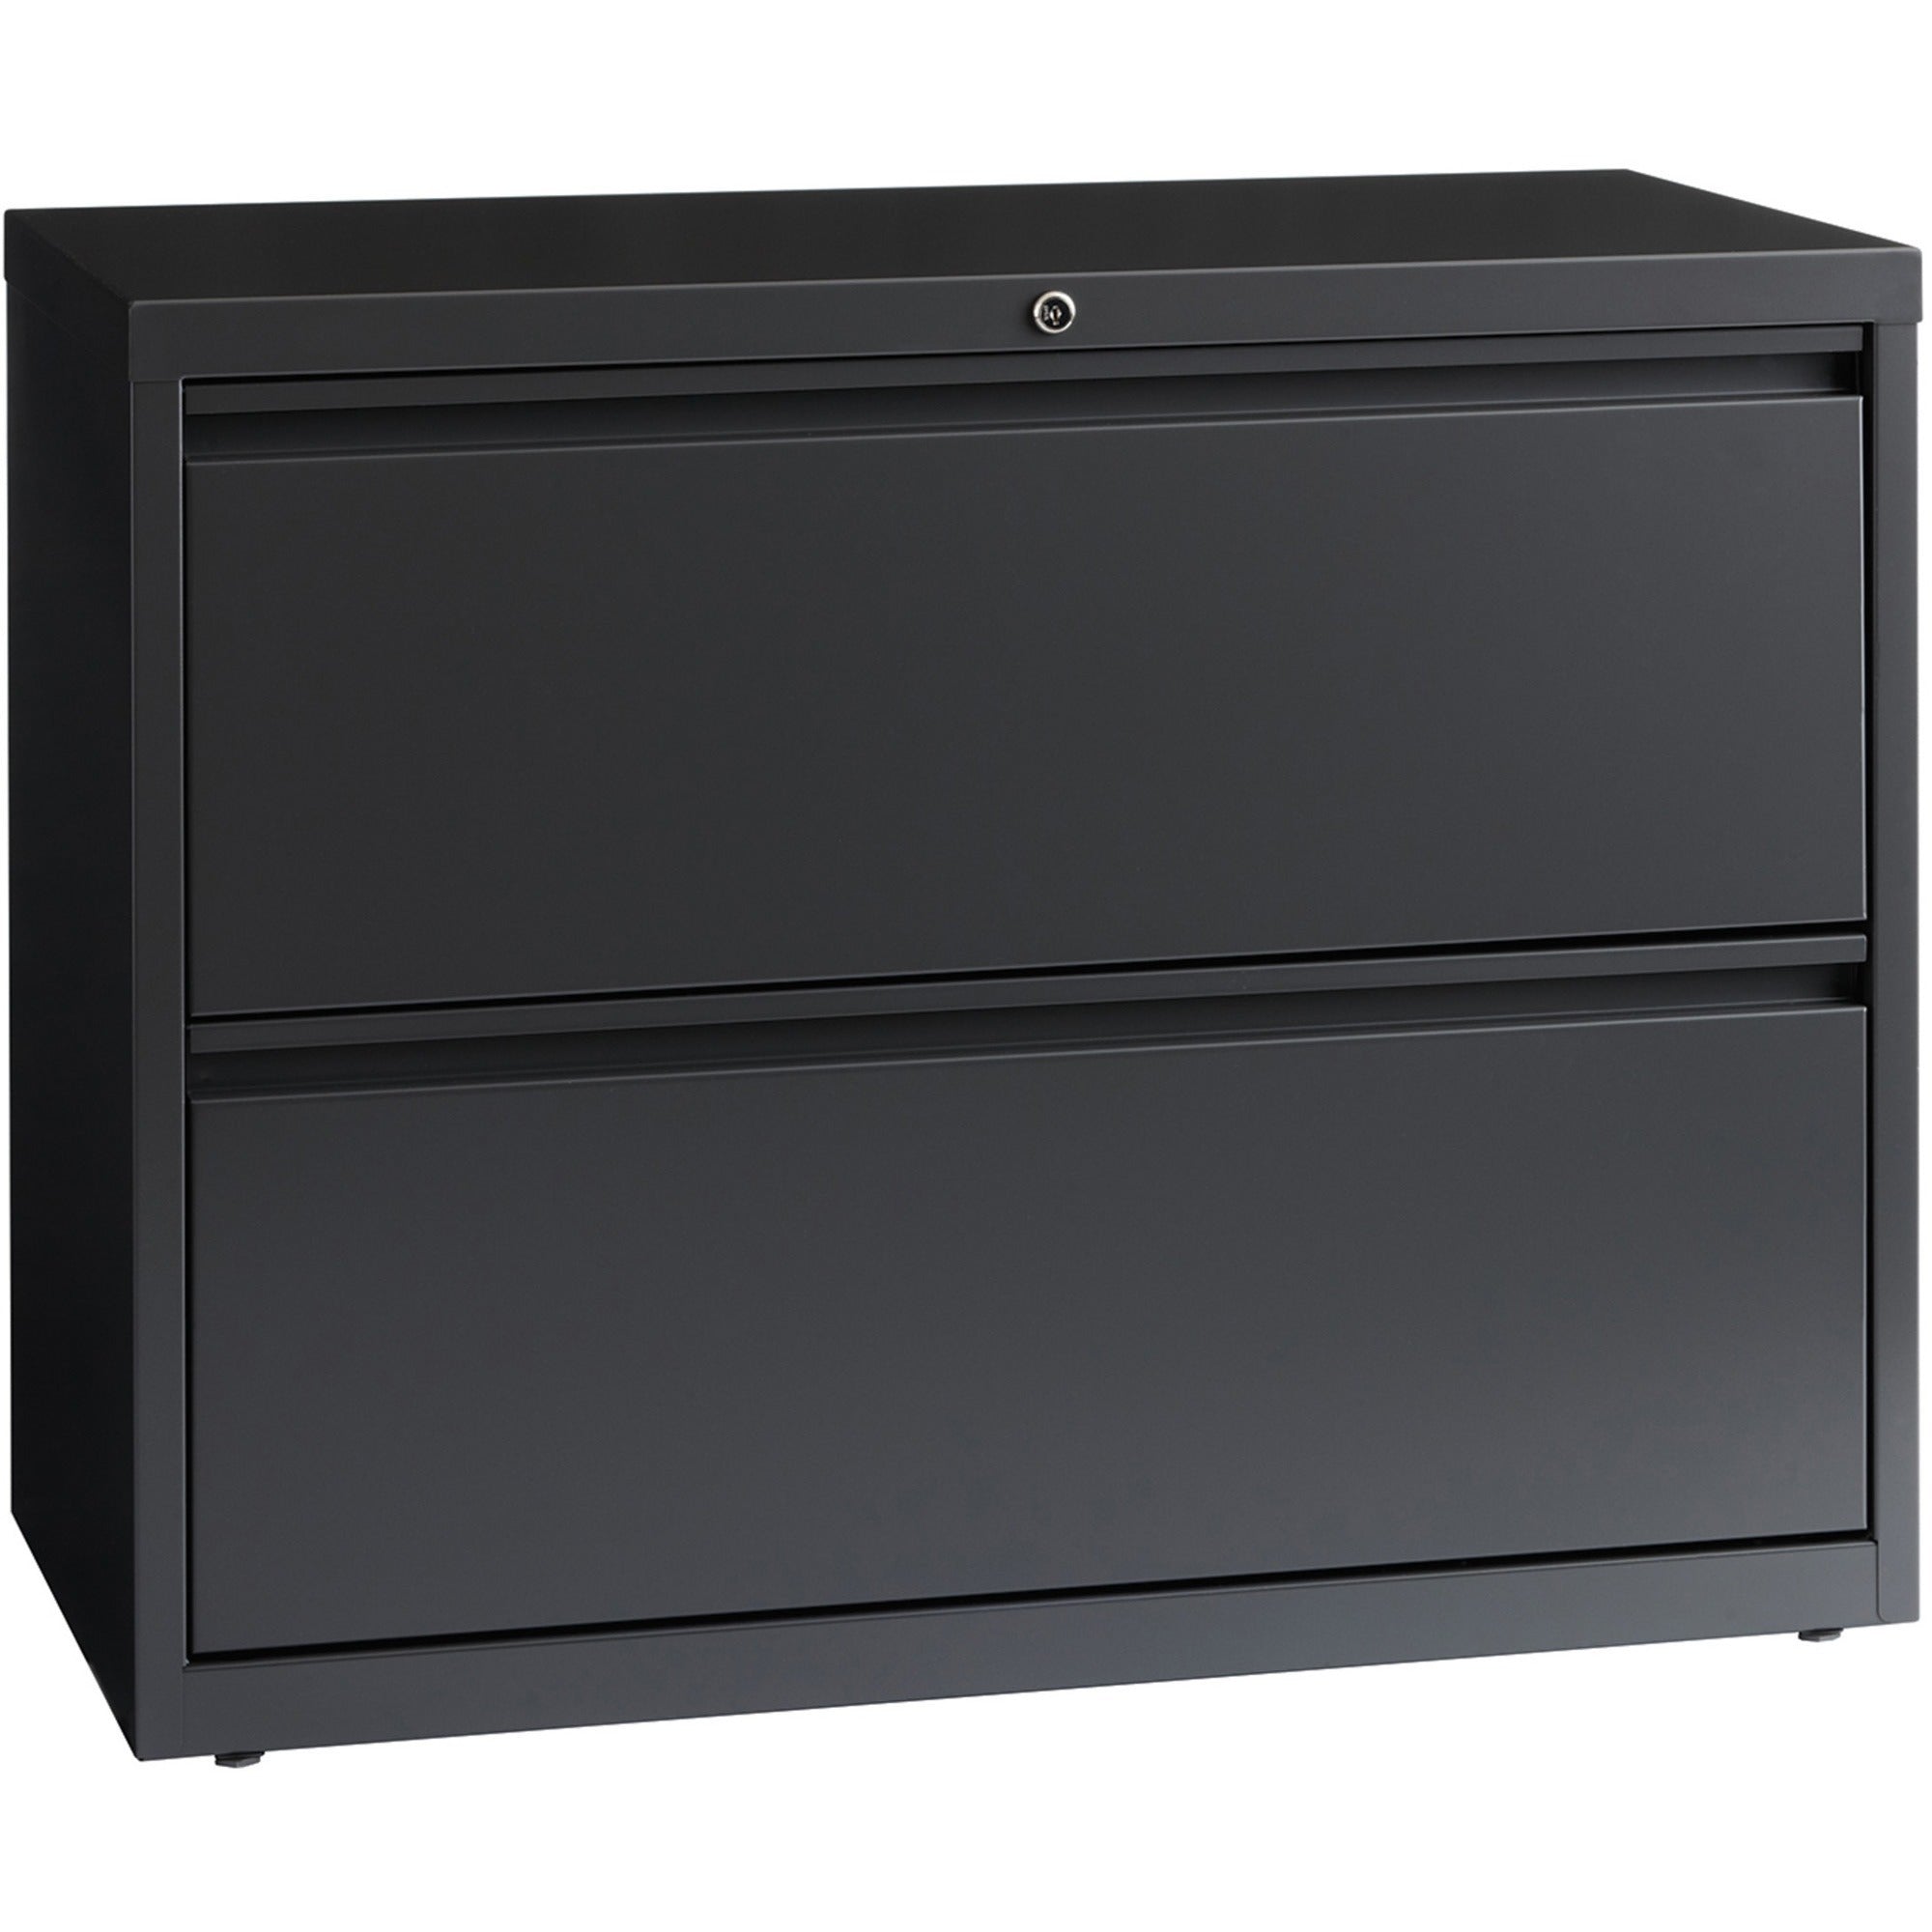 Lorell Fortress Series Lateral File - 36" x 18.6" x 28.1" - 2 x Drawer(s) - Legal, Letter, A4 - Lateral - Rust Proof, Leveling Glide, Interlocking - Charcoal - Baked Enamel - Steel - Recycled - 